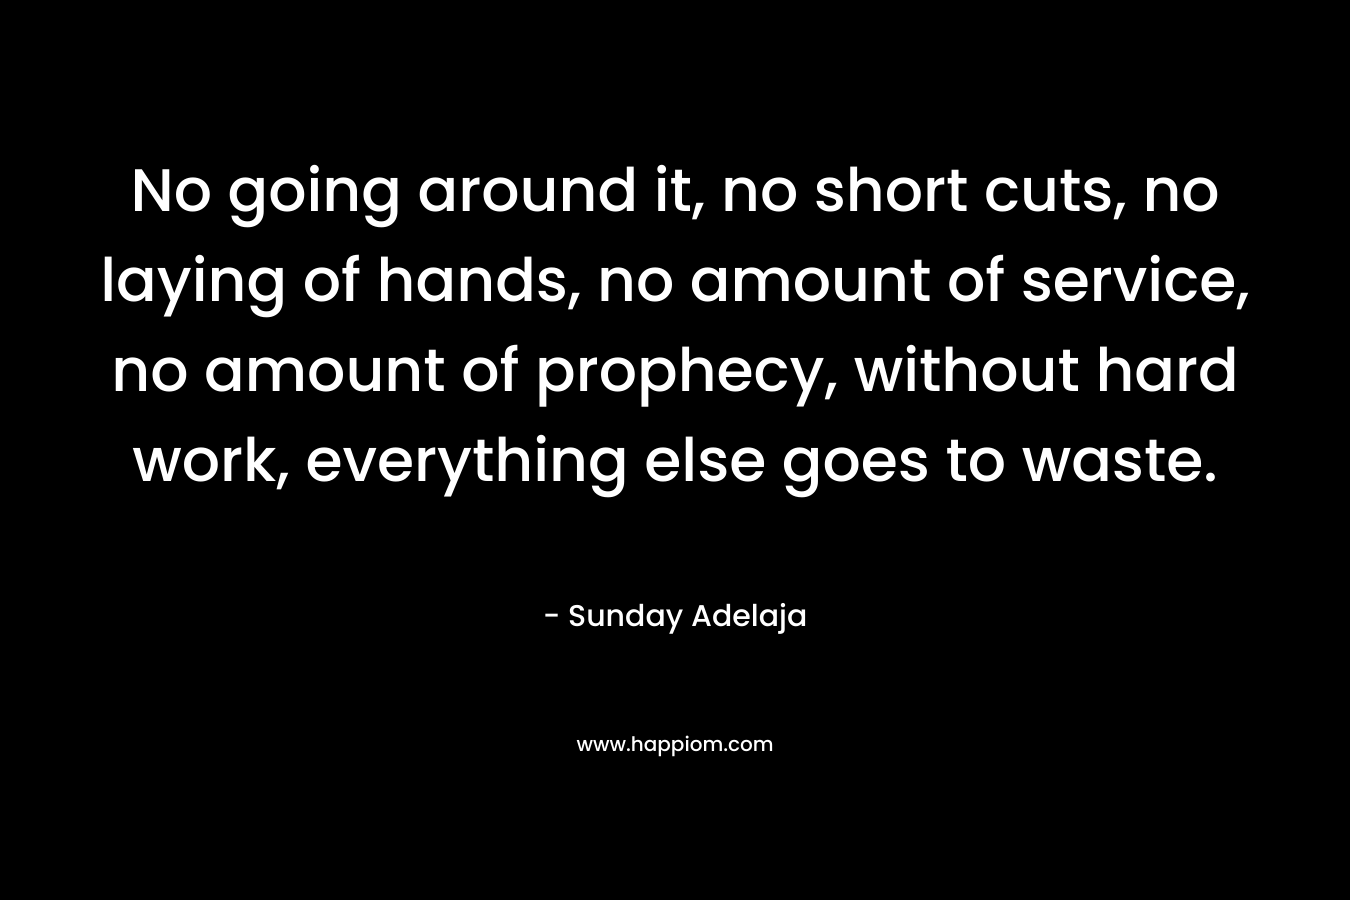 No going around it, no short cuts, no laying of hands, no amount of service, no amount of prophecy, without hard work, everything else goes to waste.